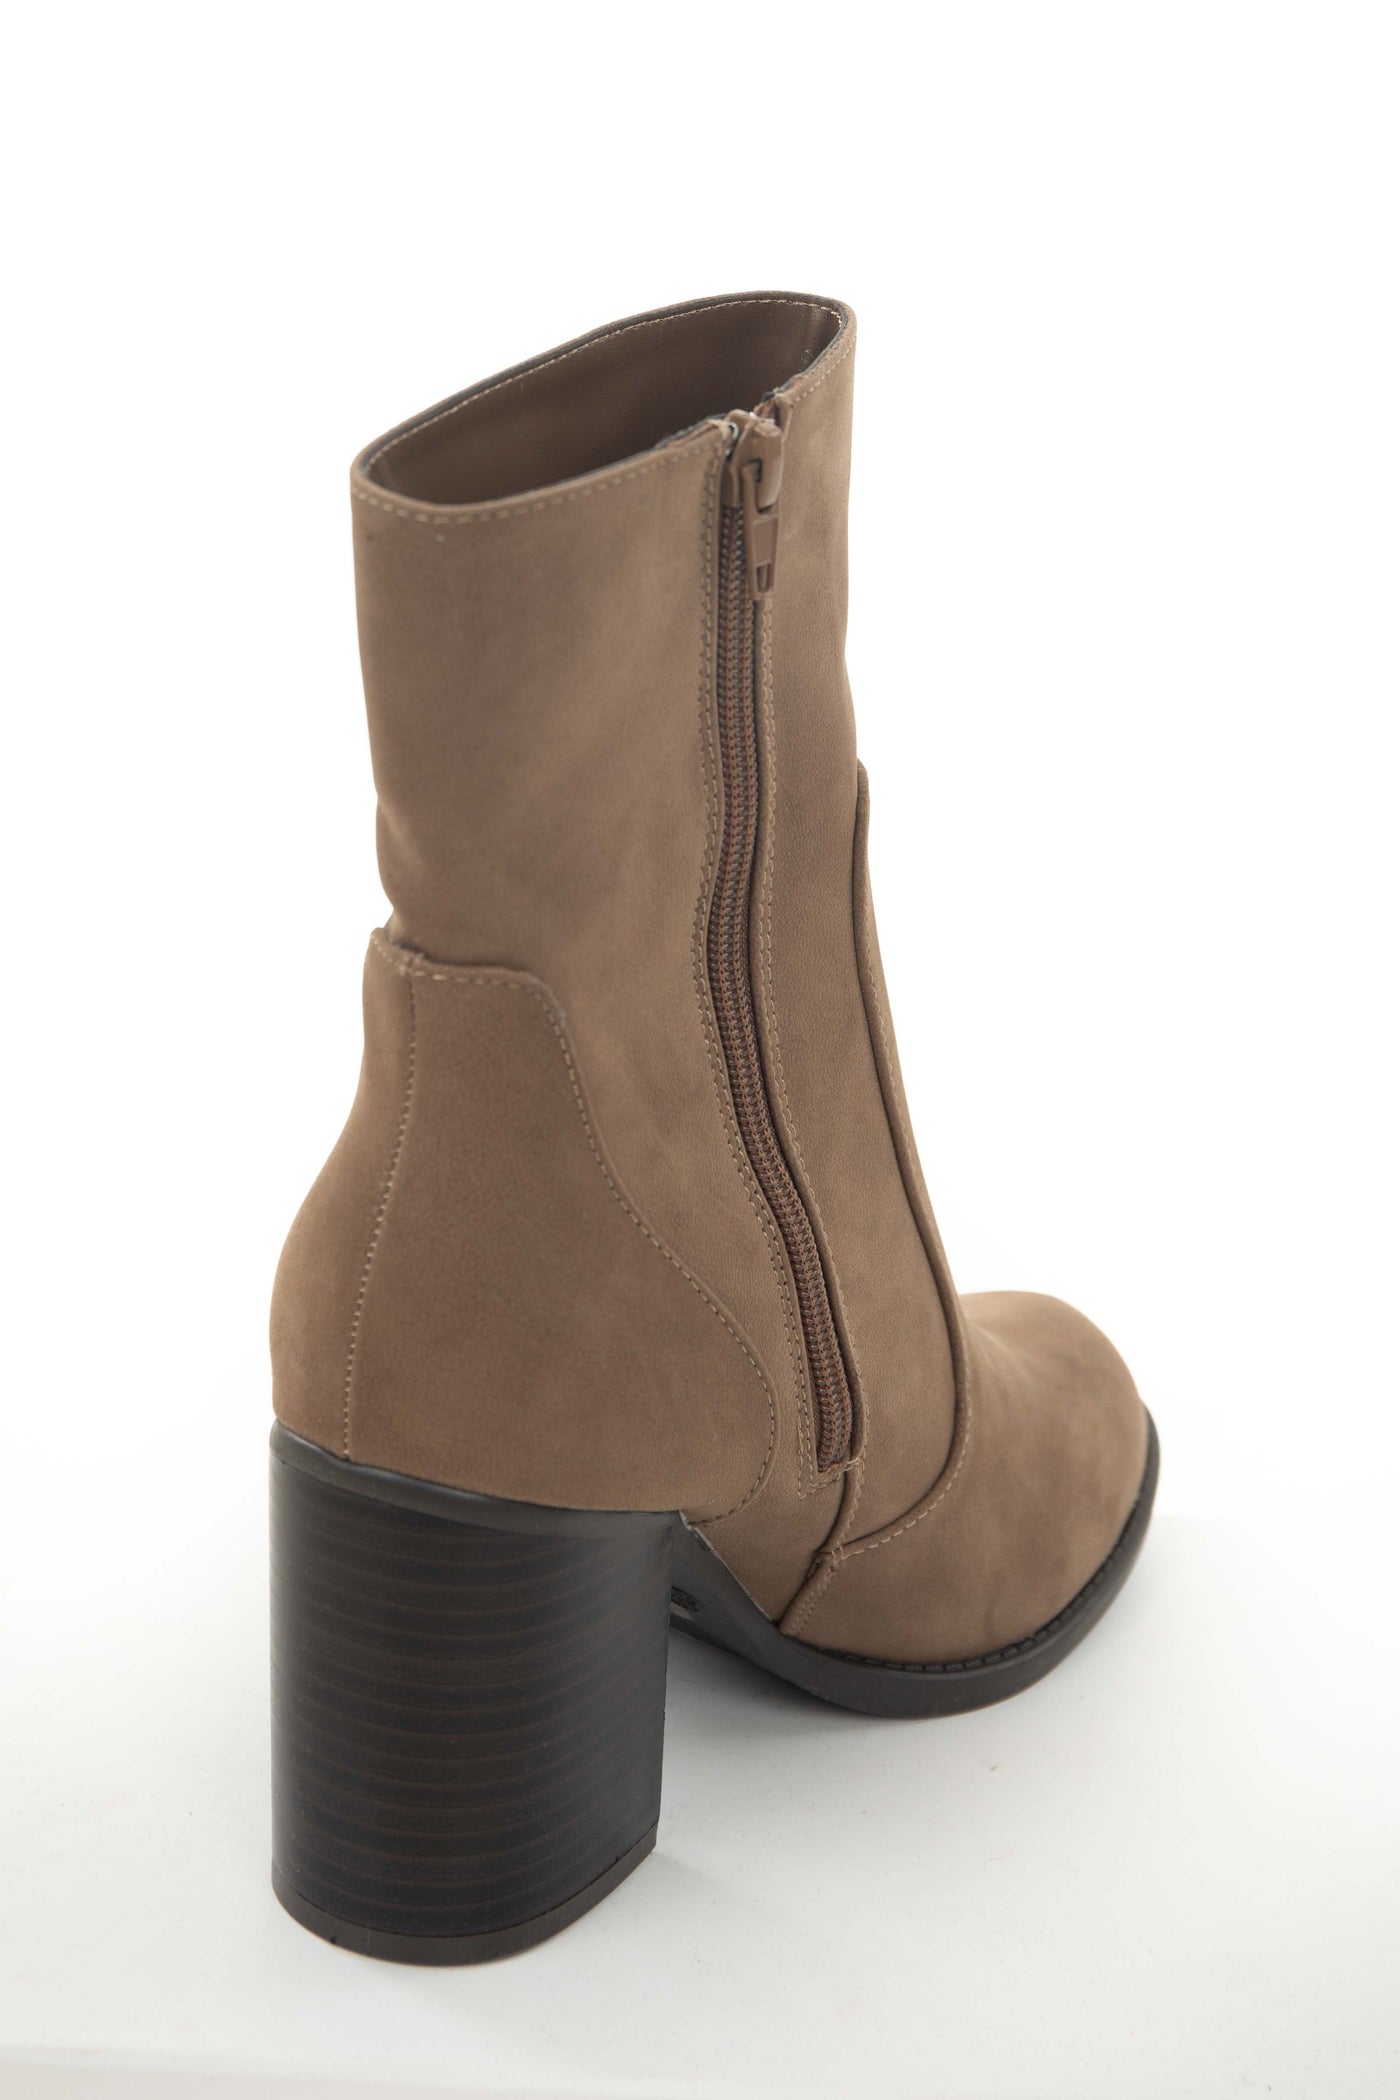 Coffee Block Heel Rounded Toe Mid Calf Boots